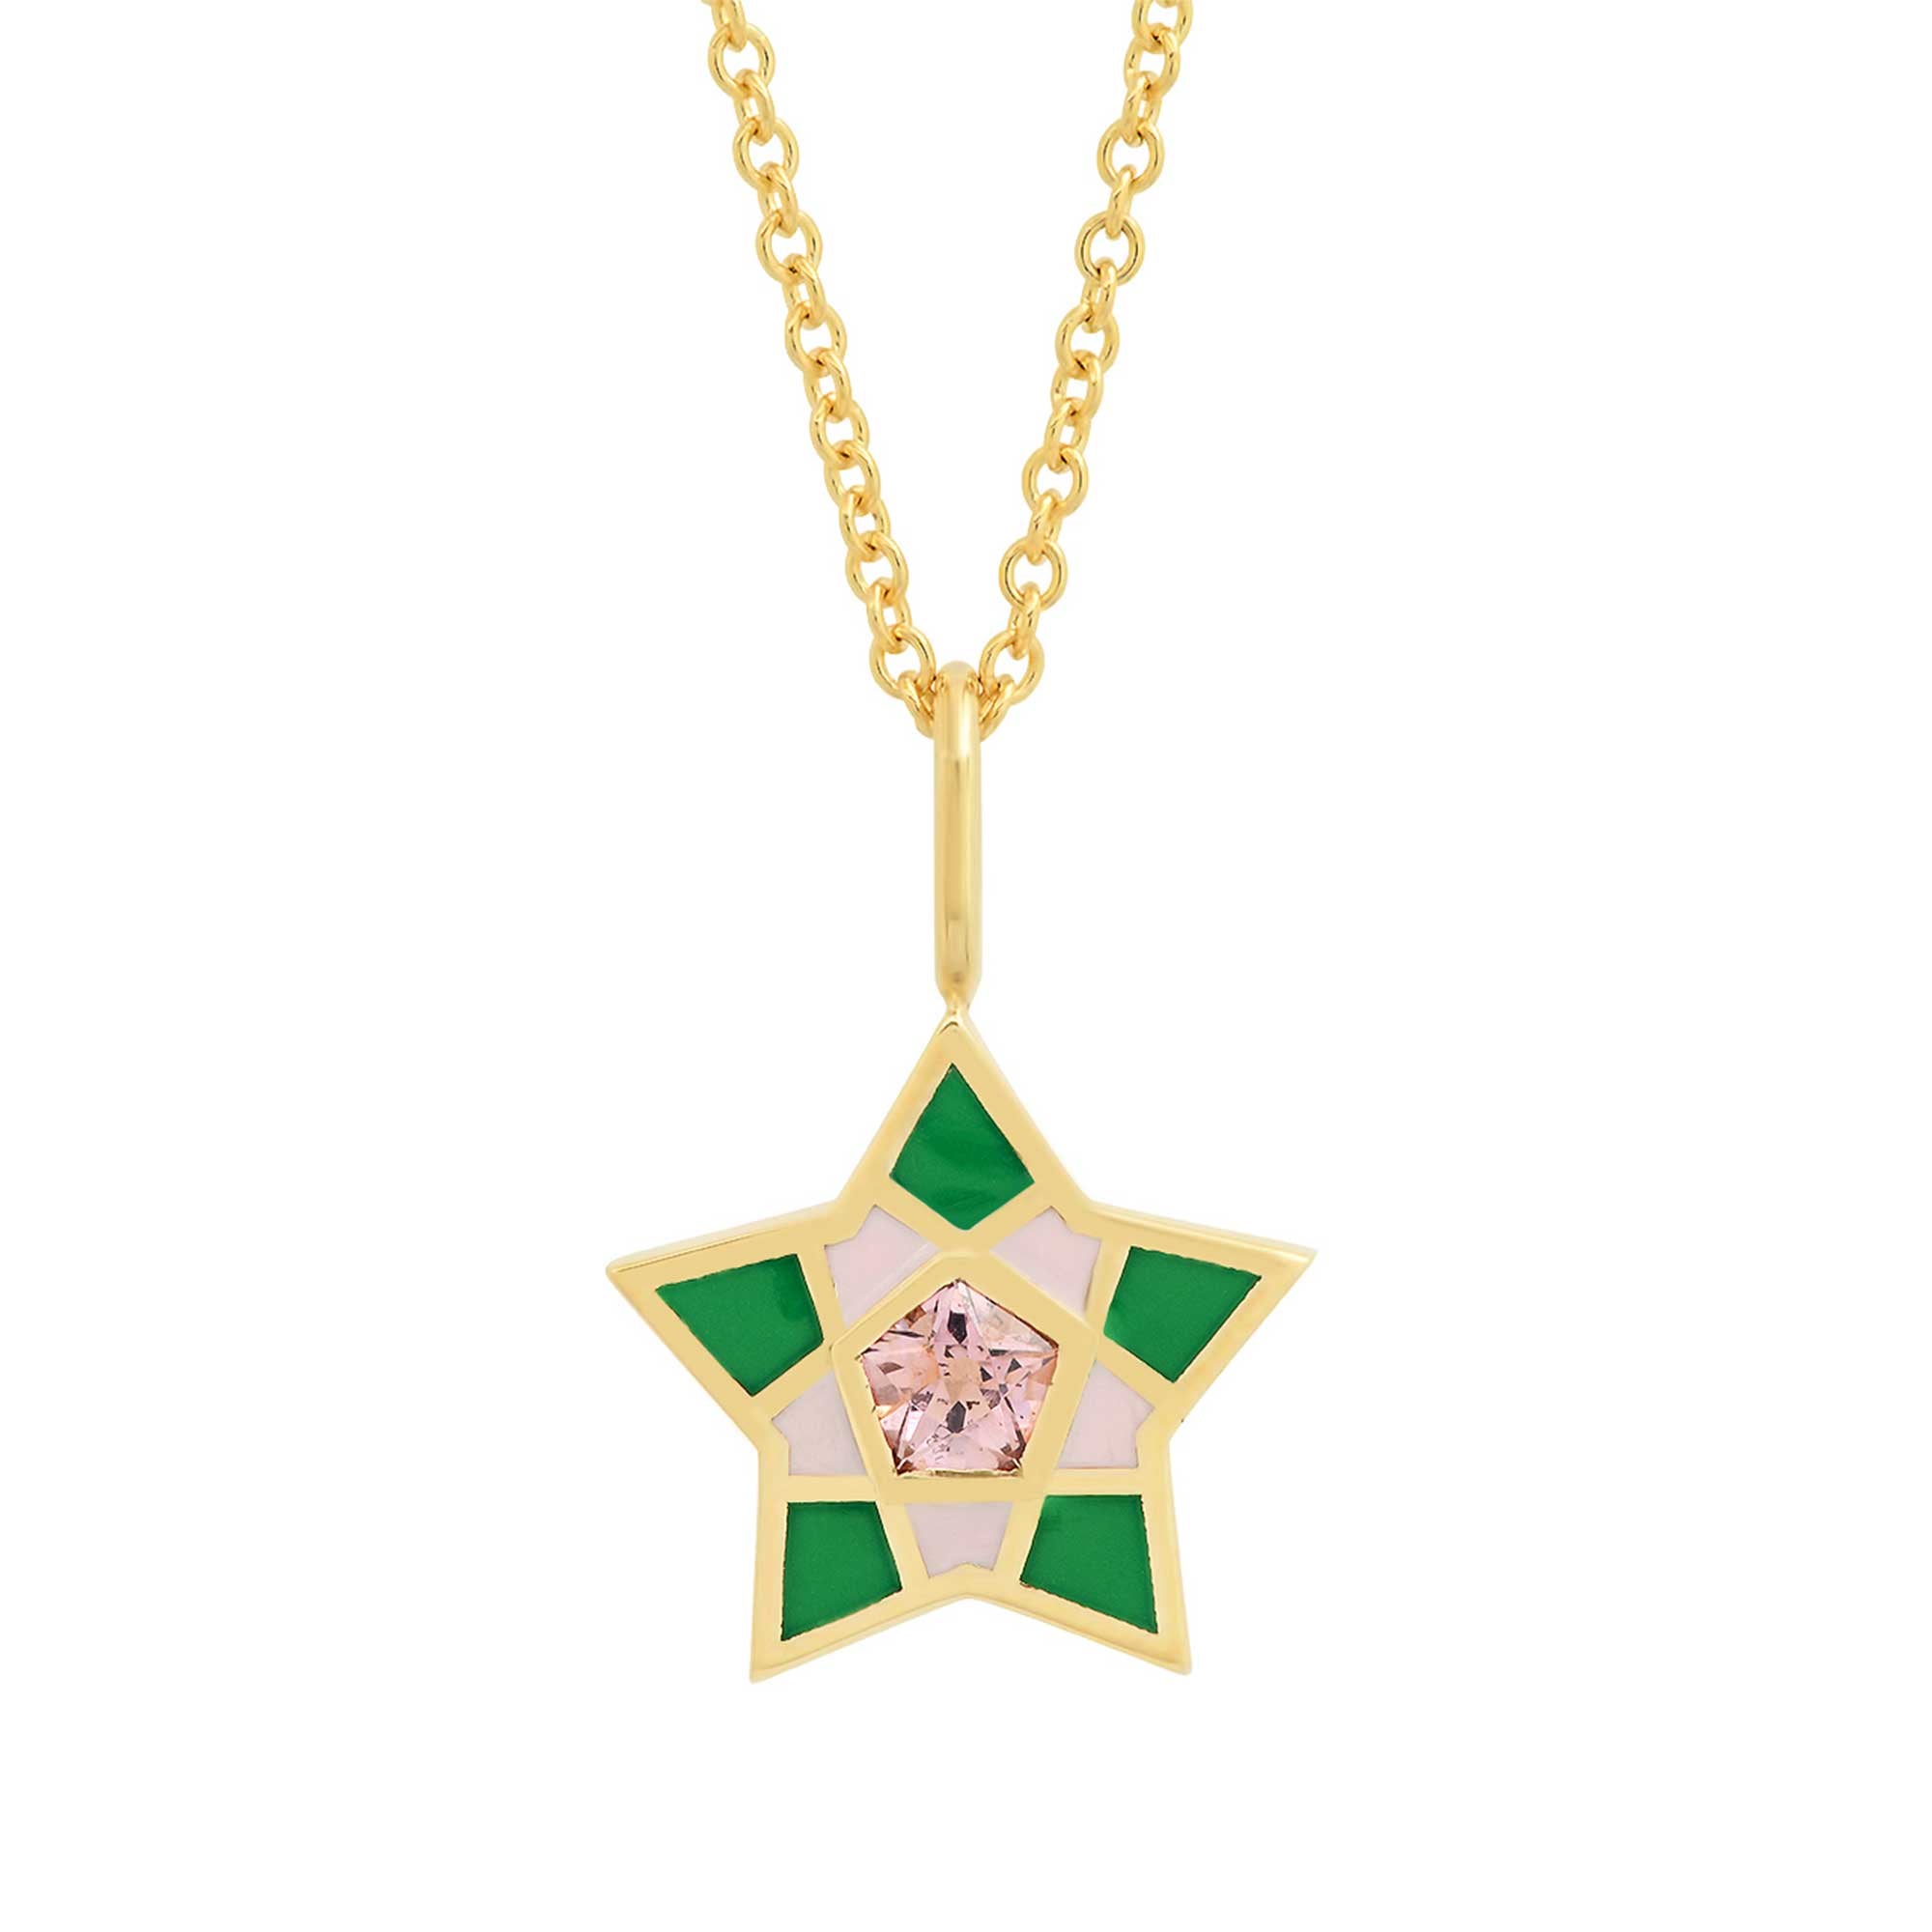 Kerr Spinel Star Necklace